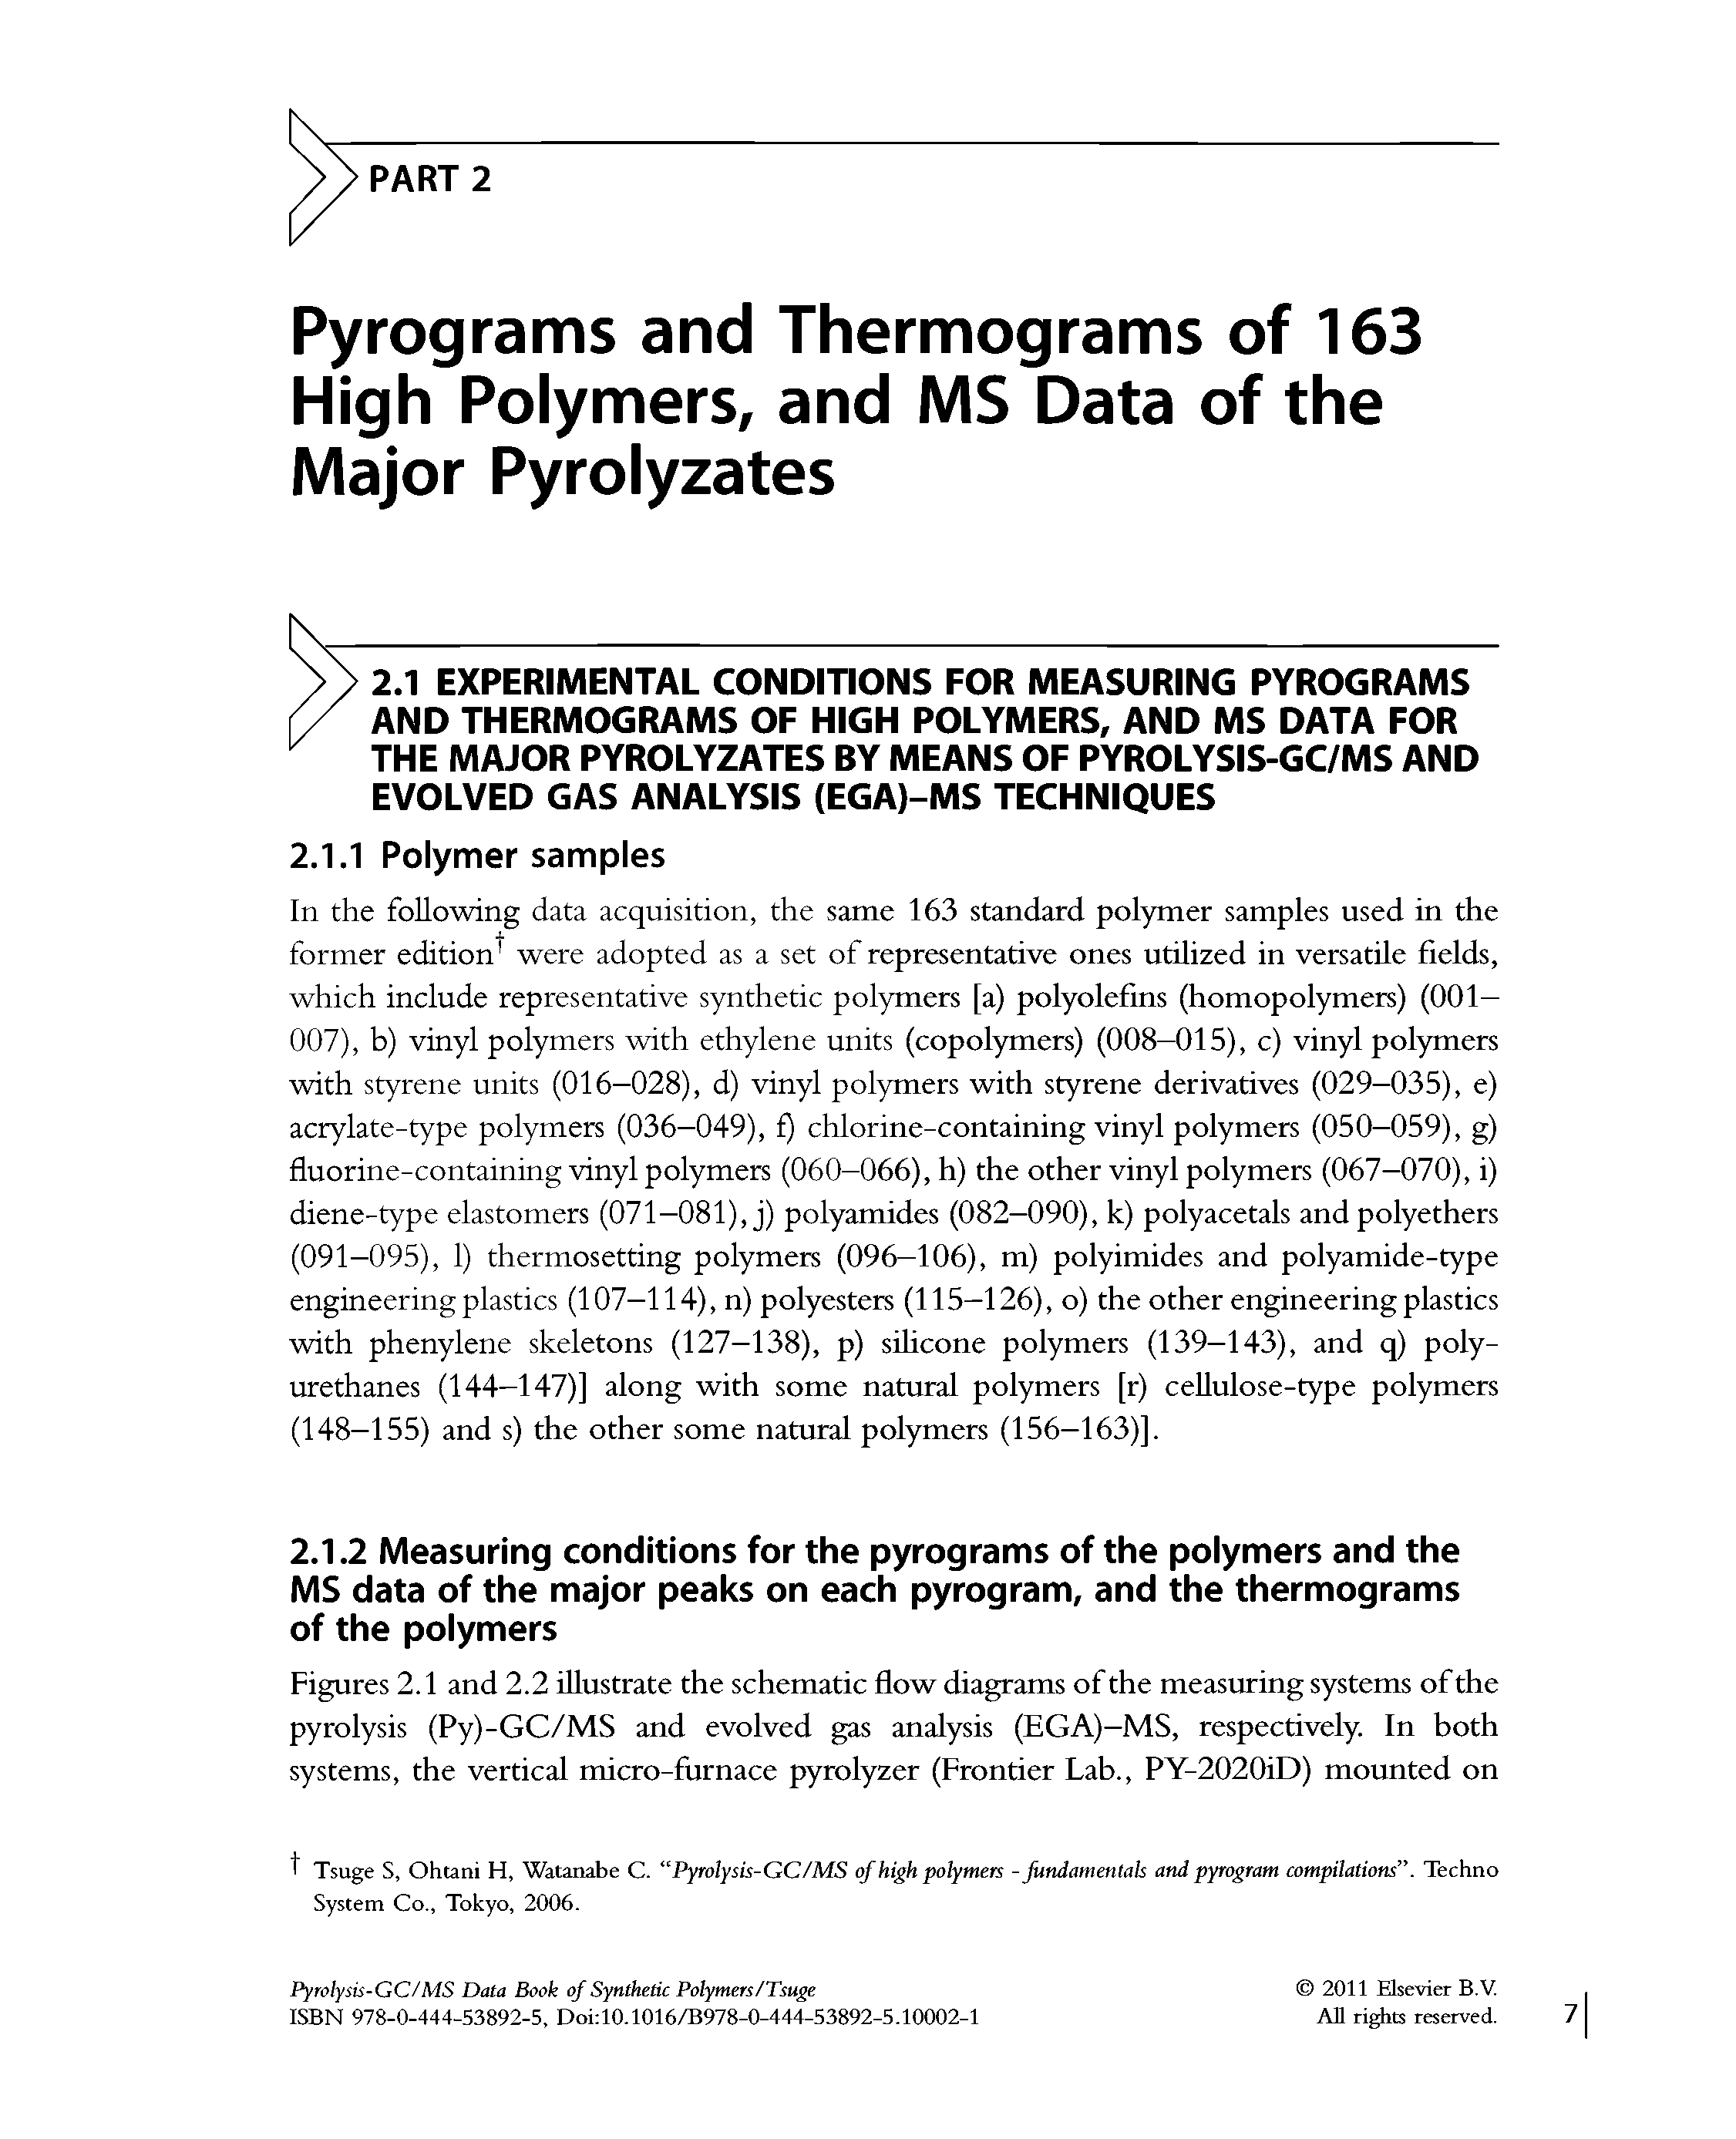 Figures 2.1 and 2.2 illustrate the schematic flow diagrams of the measuring systems of the pyrolysis (Py)-GC/MS and evolved gas analysis (EGA)—MS, respectively. In both systems, the vertical micro-furnace pyrolyzer (Frontier Lab., PY-2020iD) mounted on...